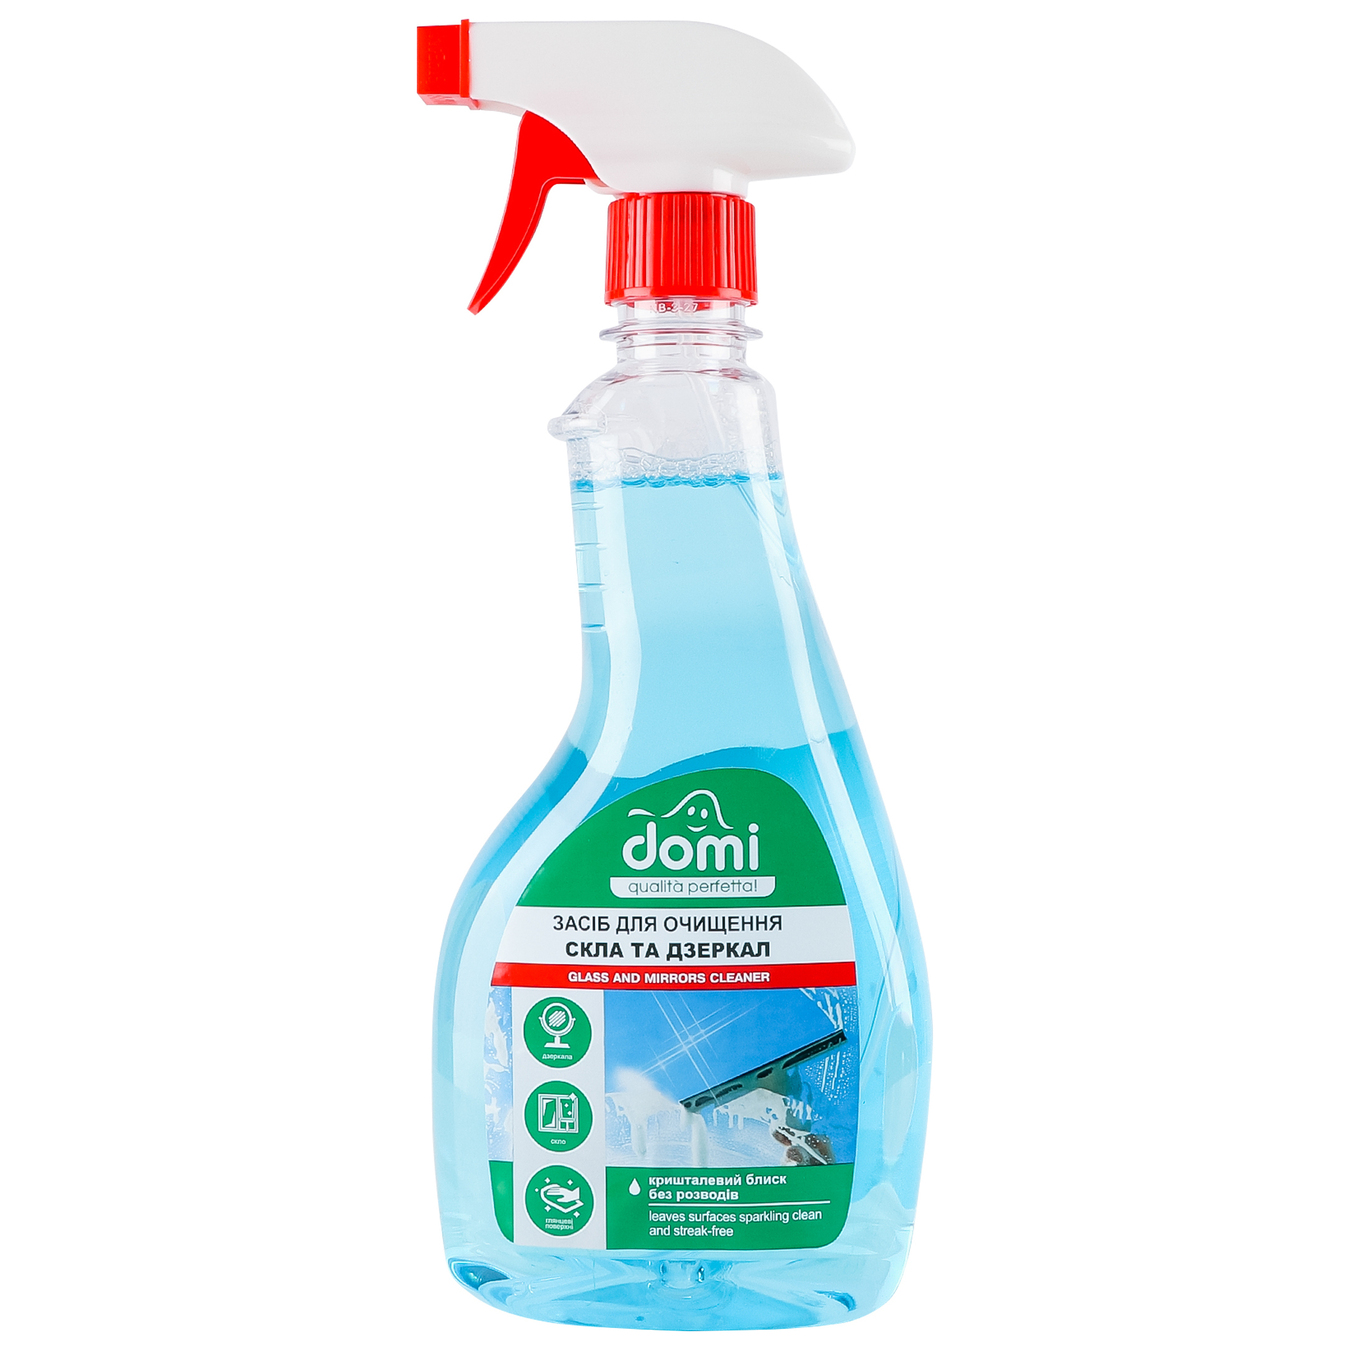 Glass and mirror cleaner Domi 500ml